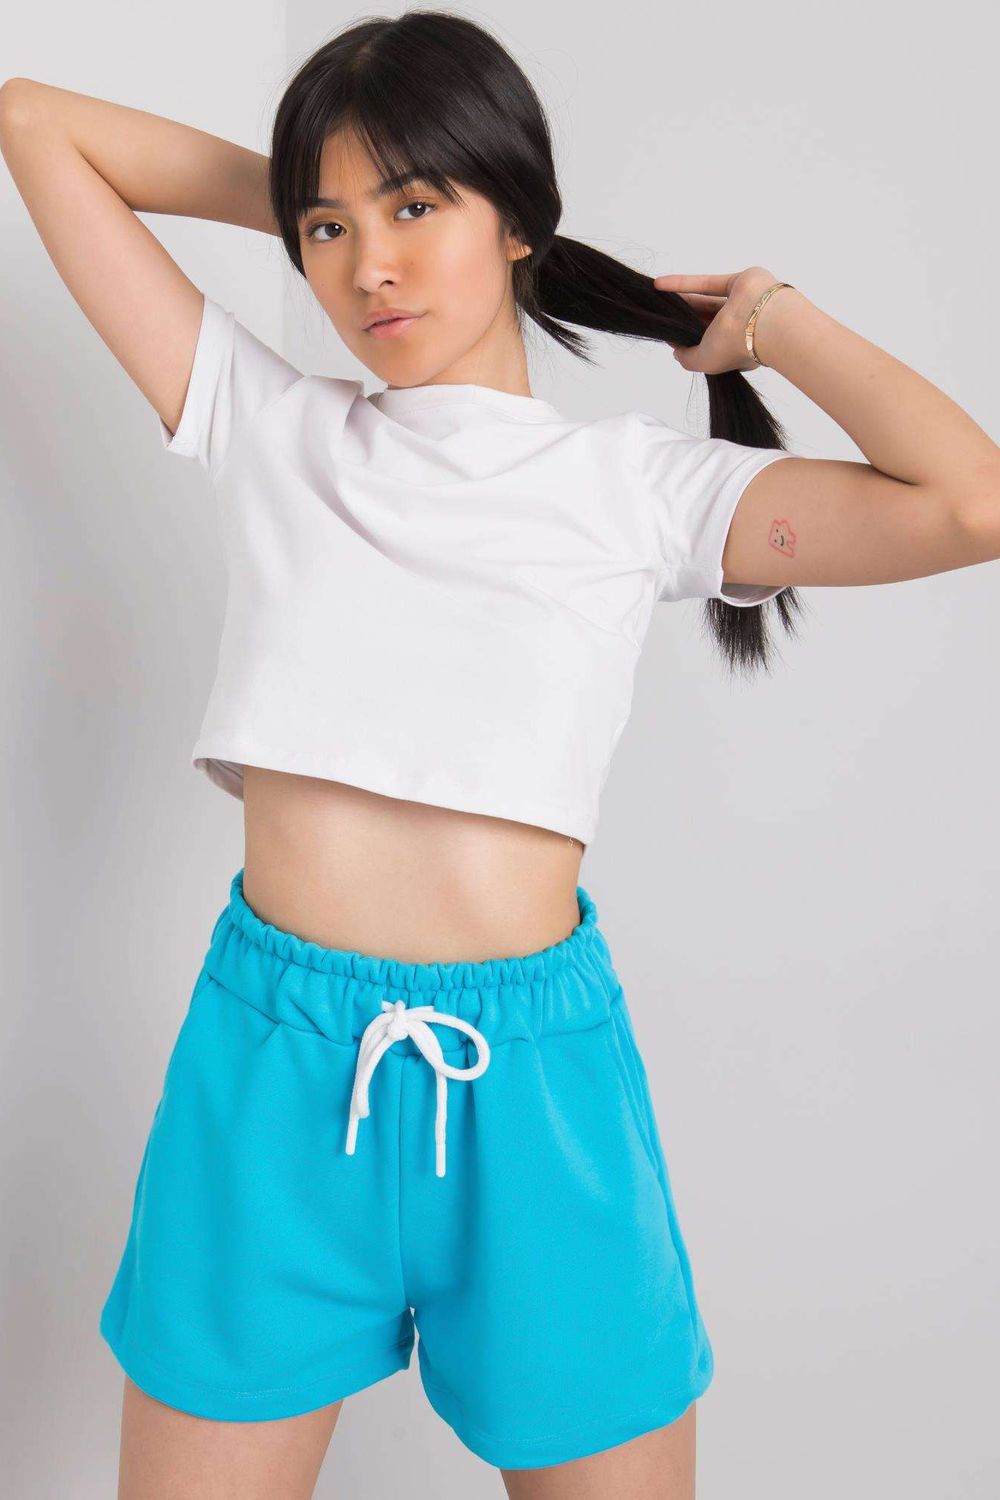 Shorts model 180903 Elsy Style Shorts for Women, Crop Pants